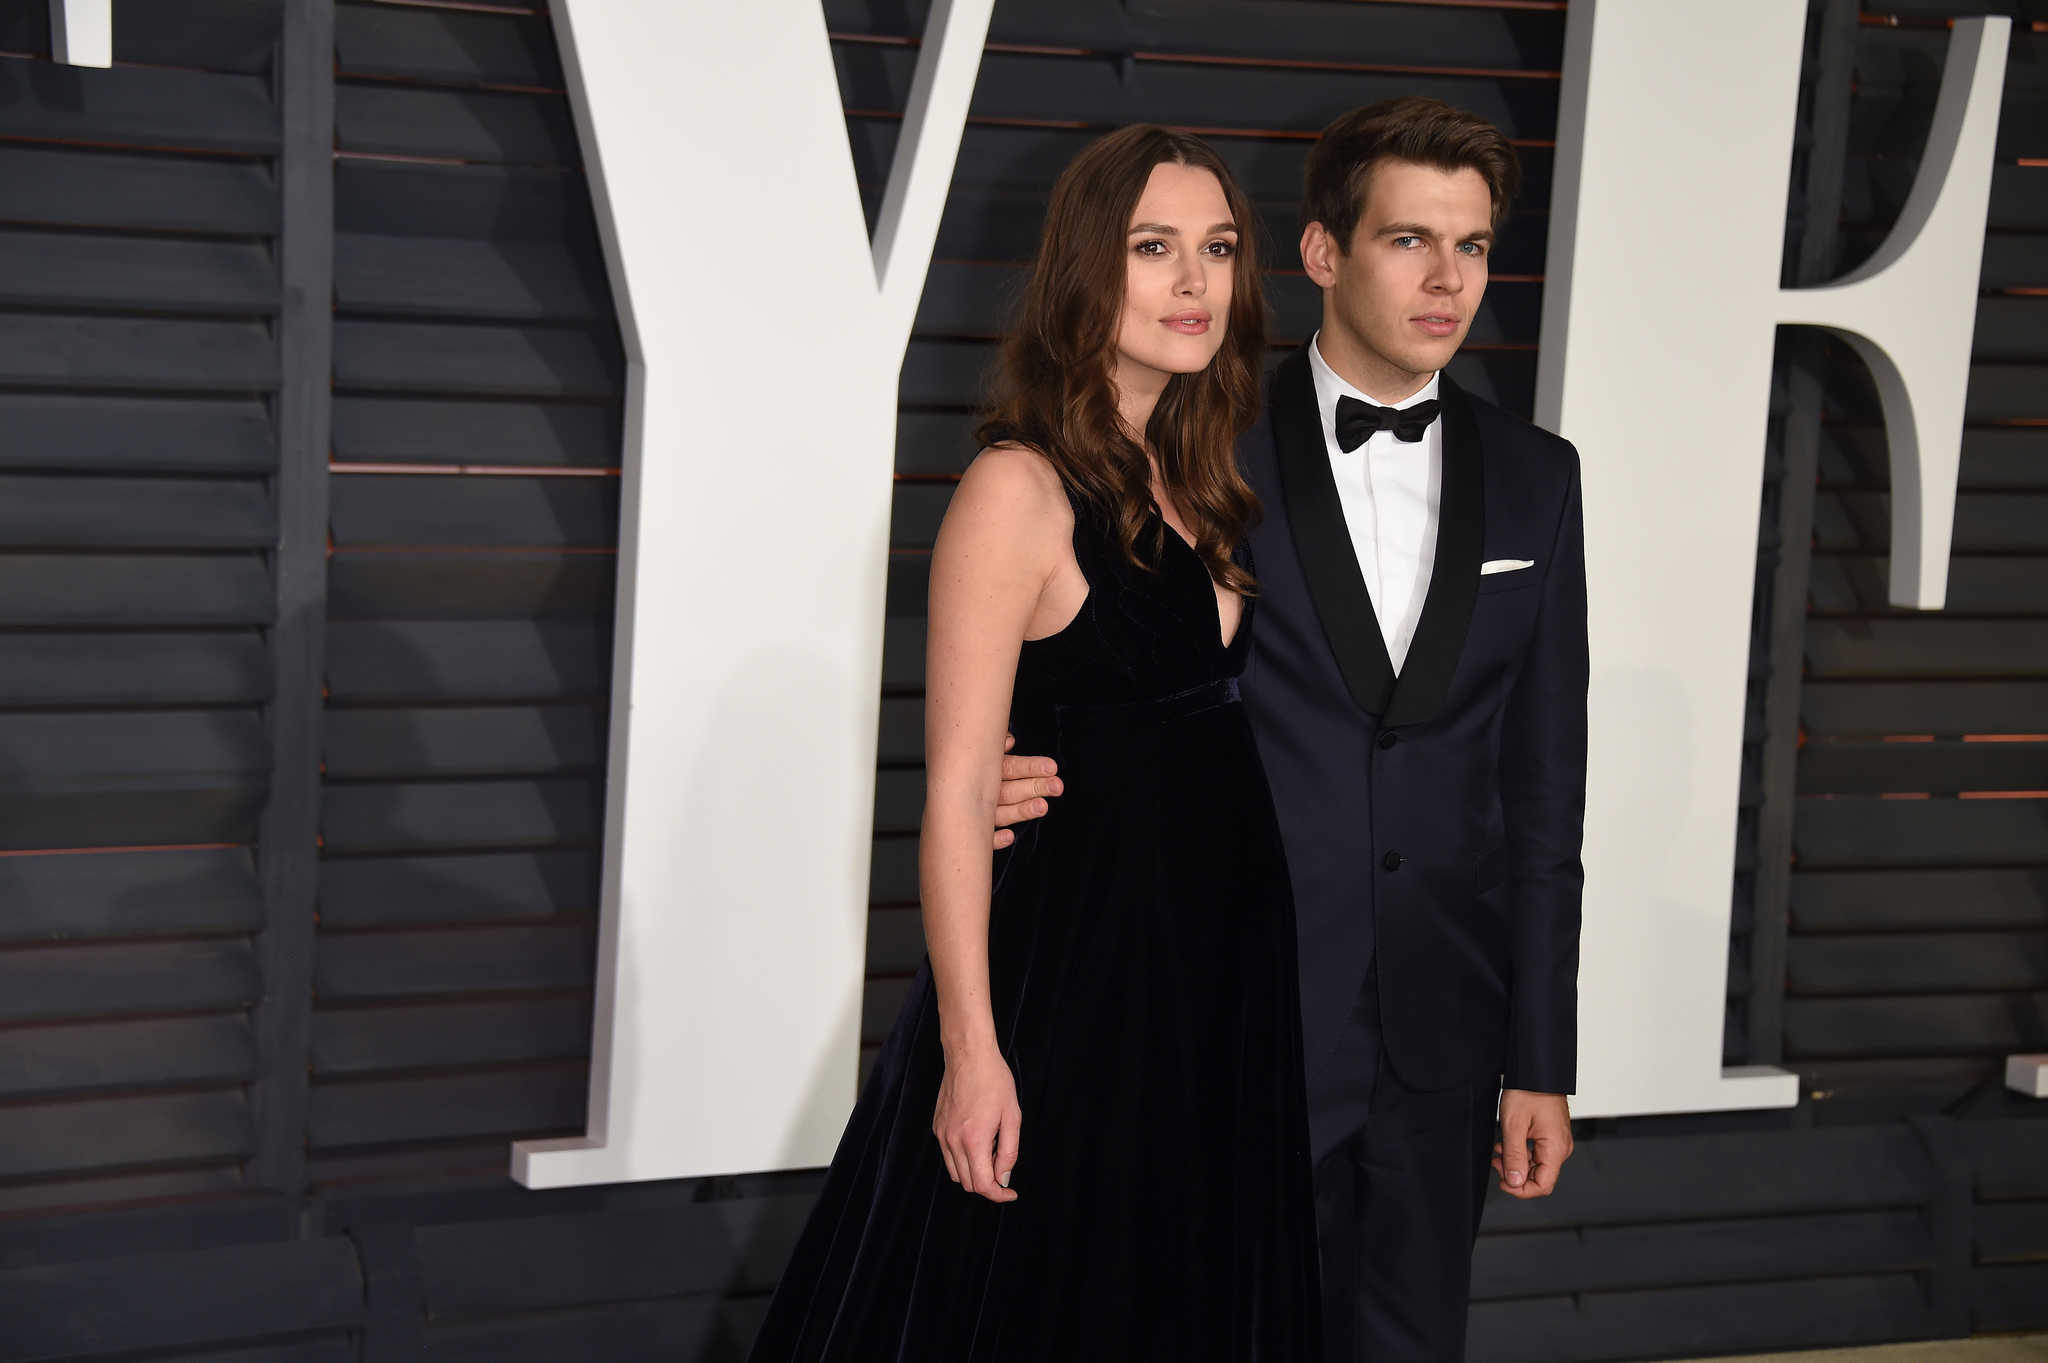 Keira Knightley and James Righton at event of The Oscars (2015)